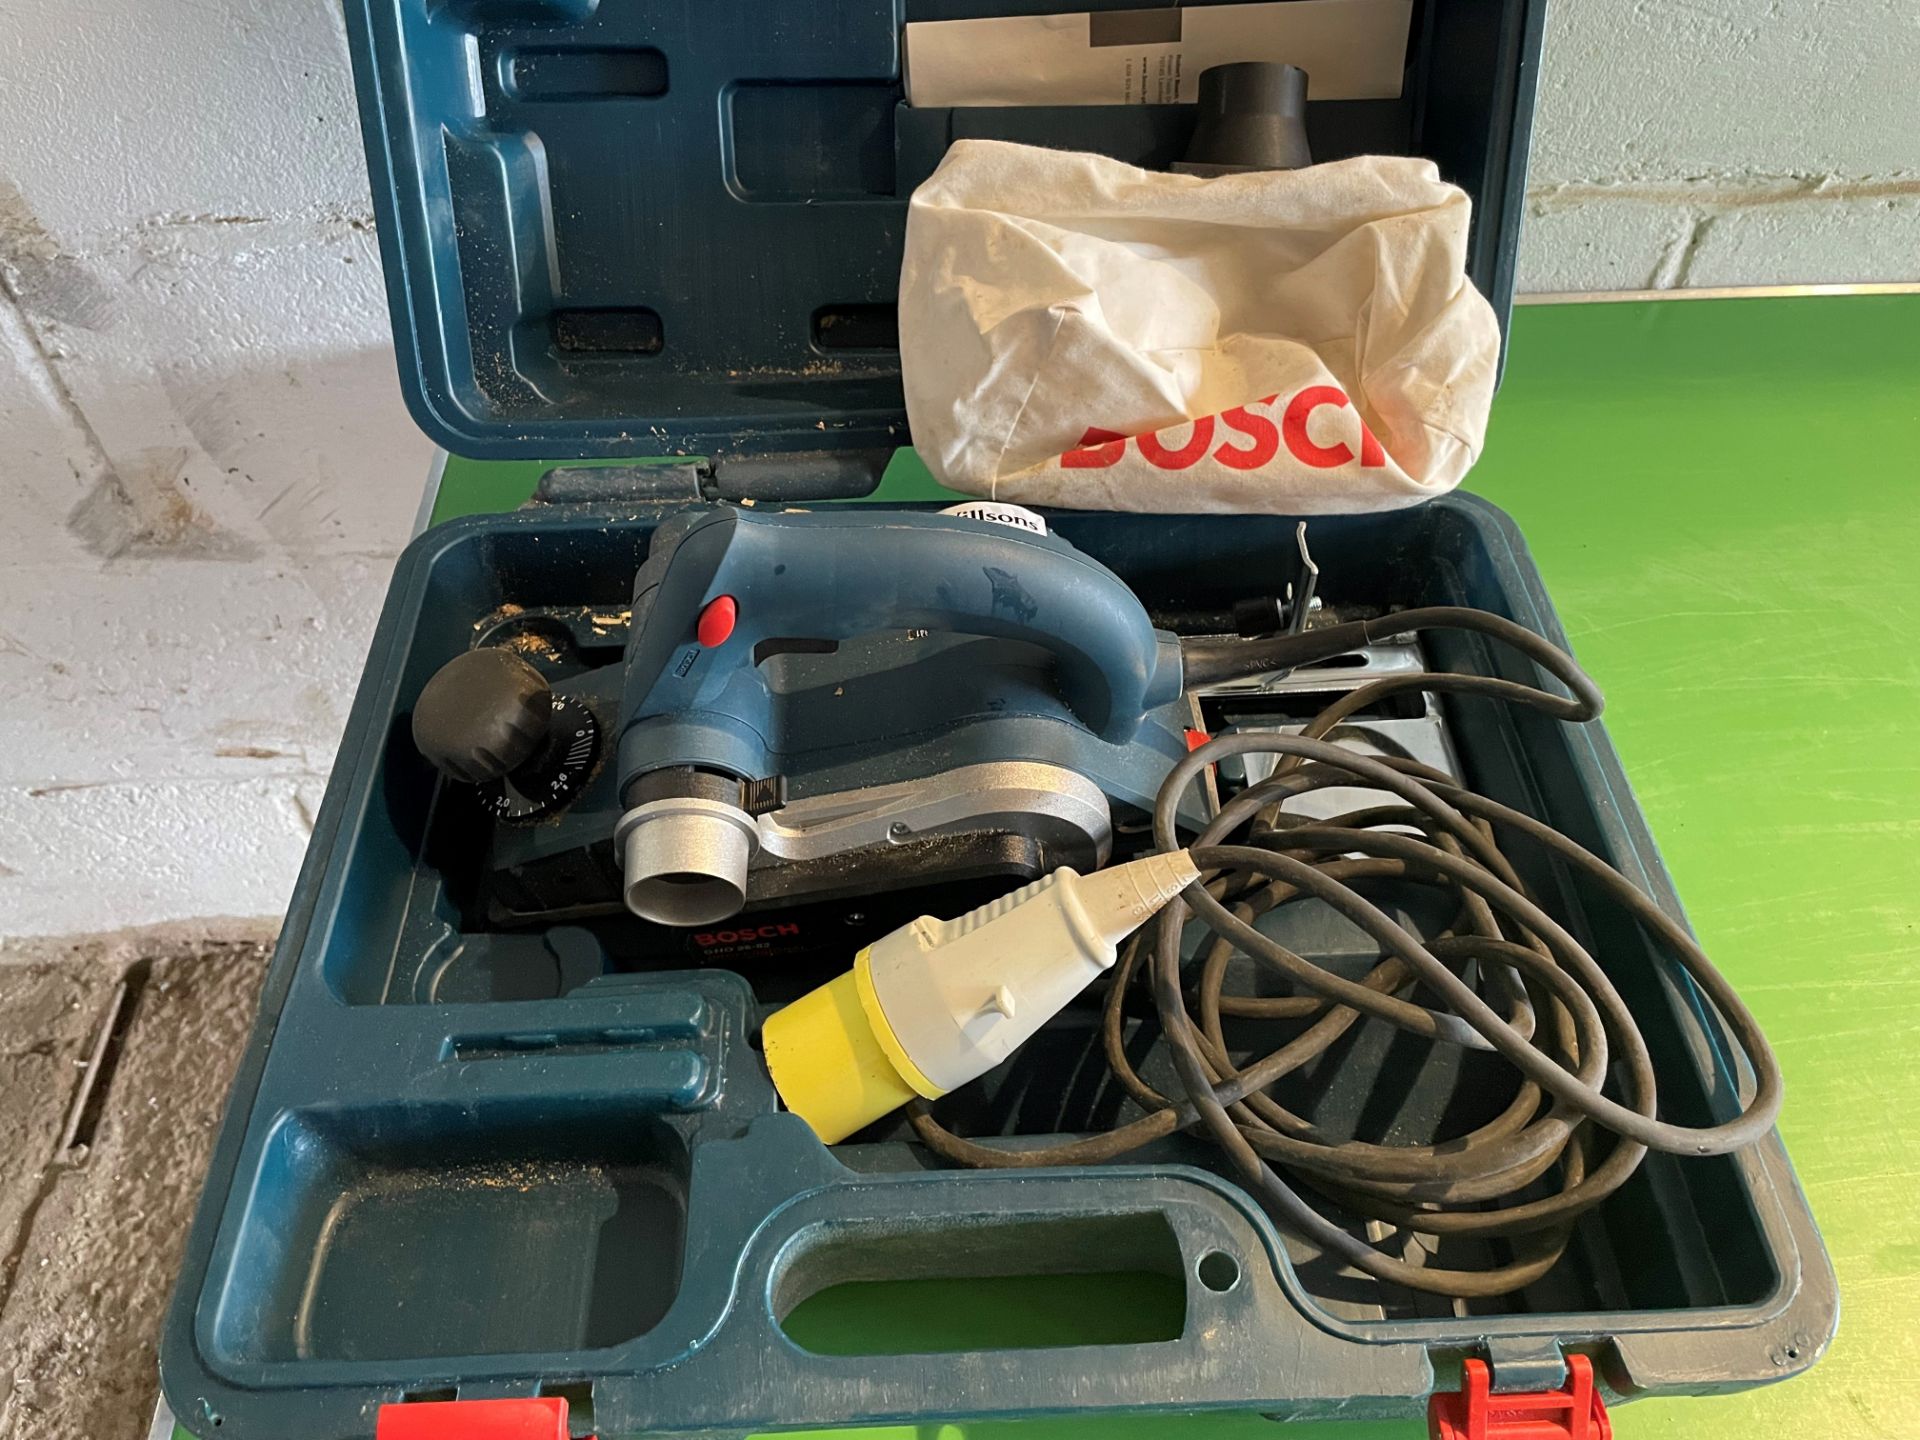 110v Bosch GH026/82 professional planer very good condition in box